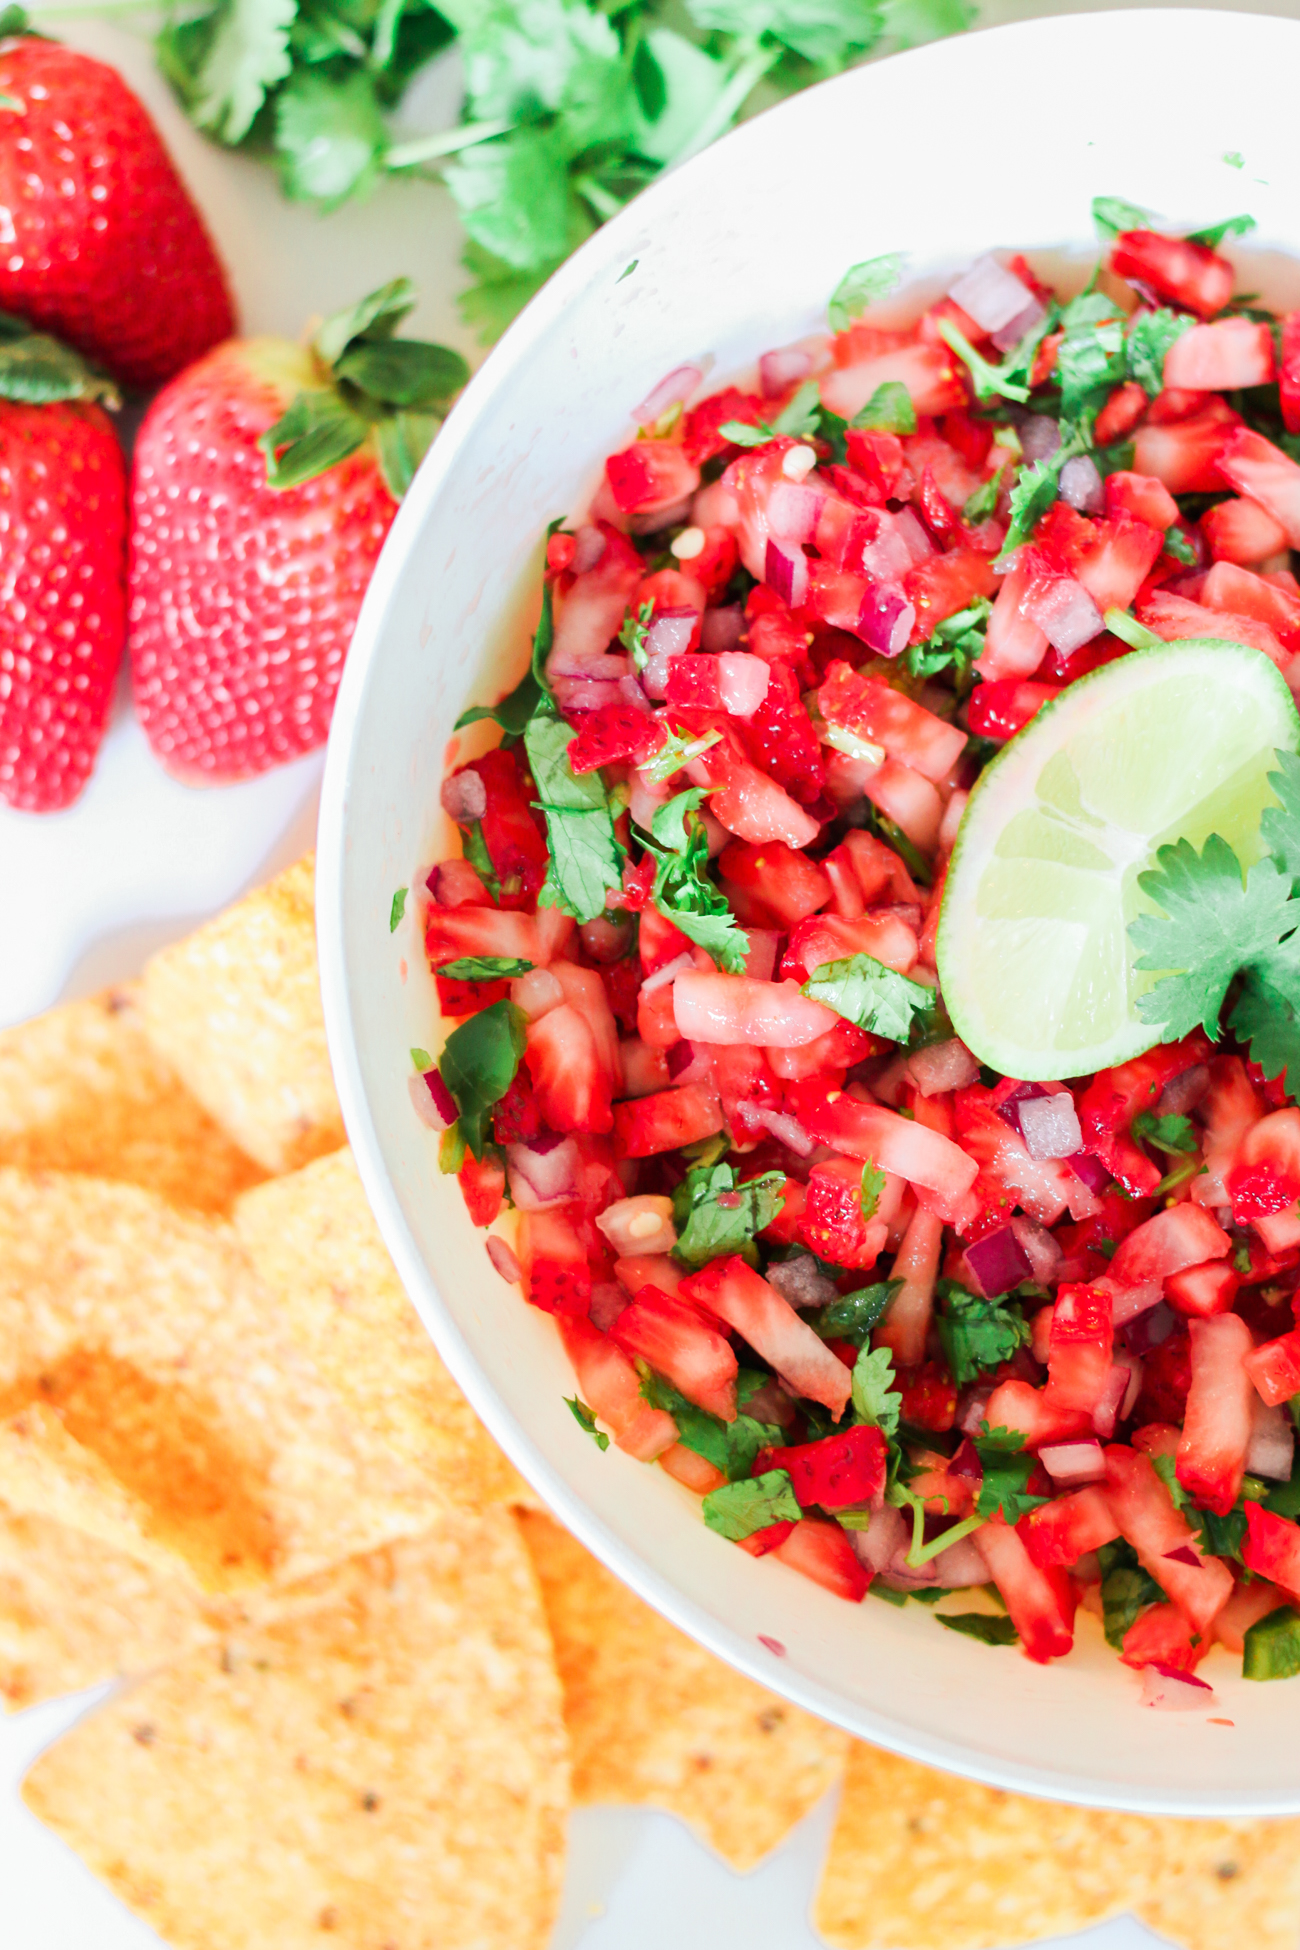 Two Quick Fresh Salsa Recipes for Your Cinco de Mayo Fiesta by southern lifestyle blogger Stephanie Ziajka from Diary of a Debutante, strawberry jalapeno salsa recipe, strawberry and jalapeno salsa recipe, homemade salsa recipe, easy Cinco de Mayo salsa recipe